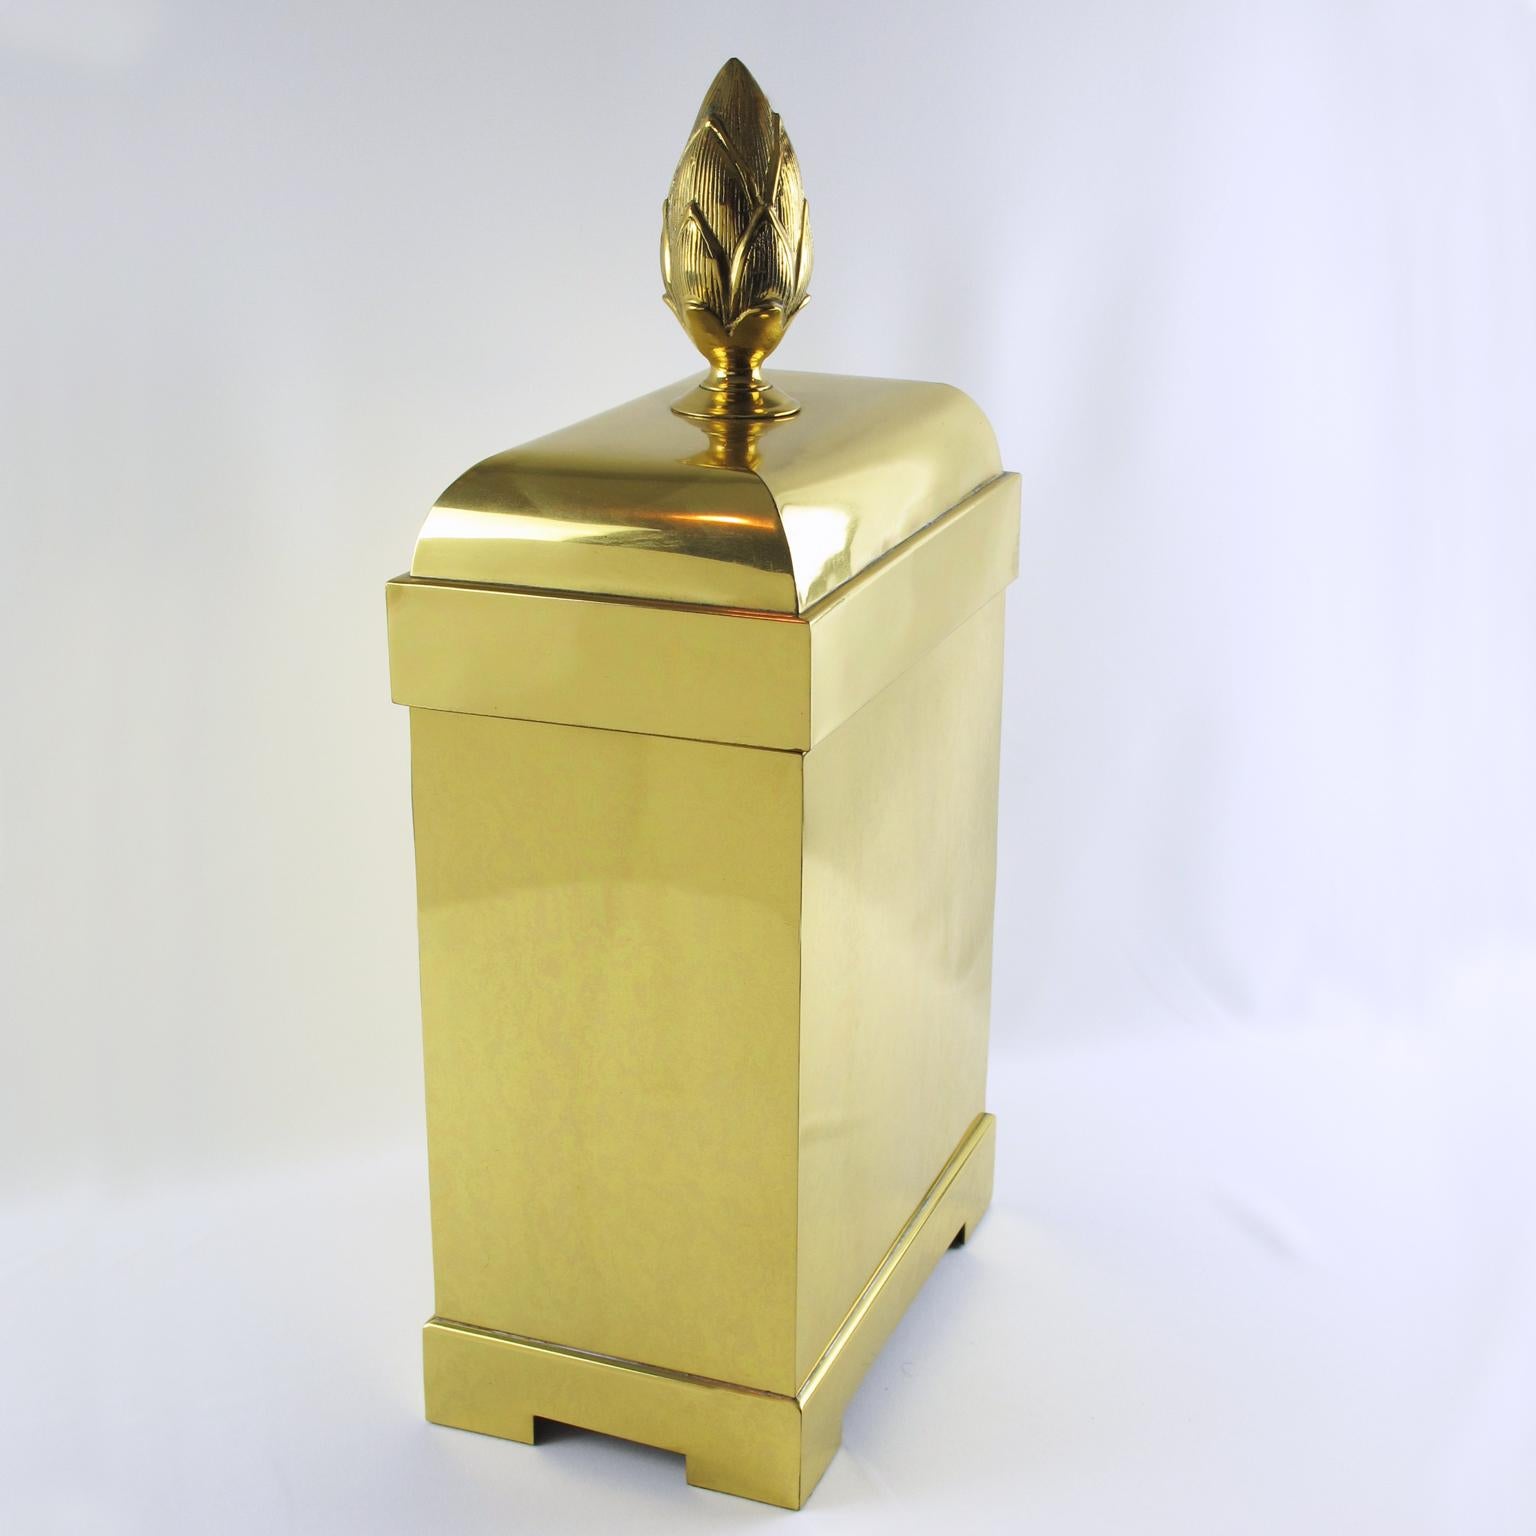 Chapman Manufacturing Company designed this stunning oversized lidded brass decorative box or magazine storage stand in the 1980s. The box boasts a tall geometric shape with a massive brass pine cone carved handle. The piece is lined with a black